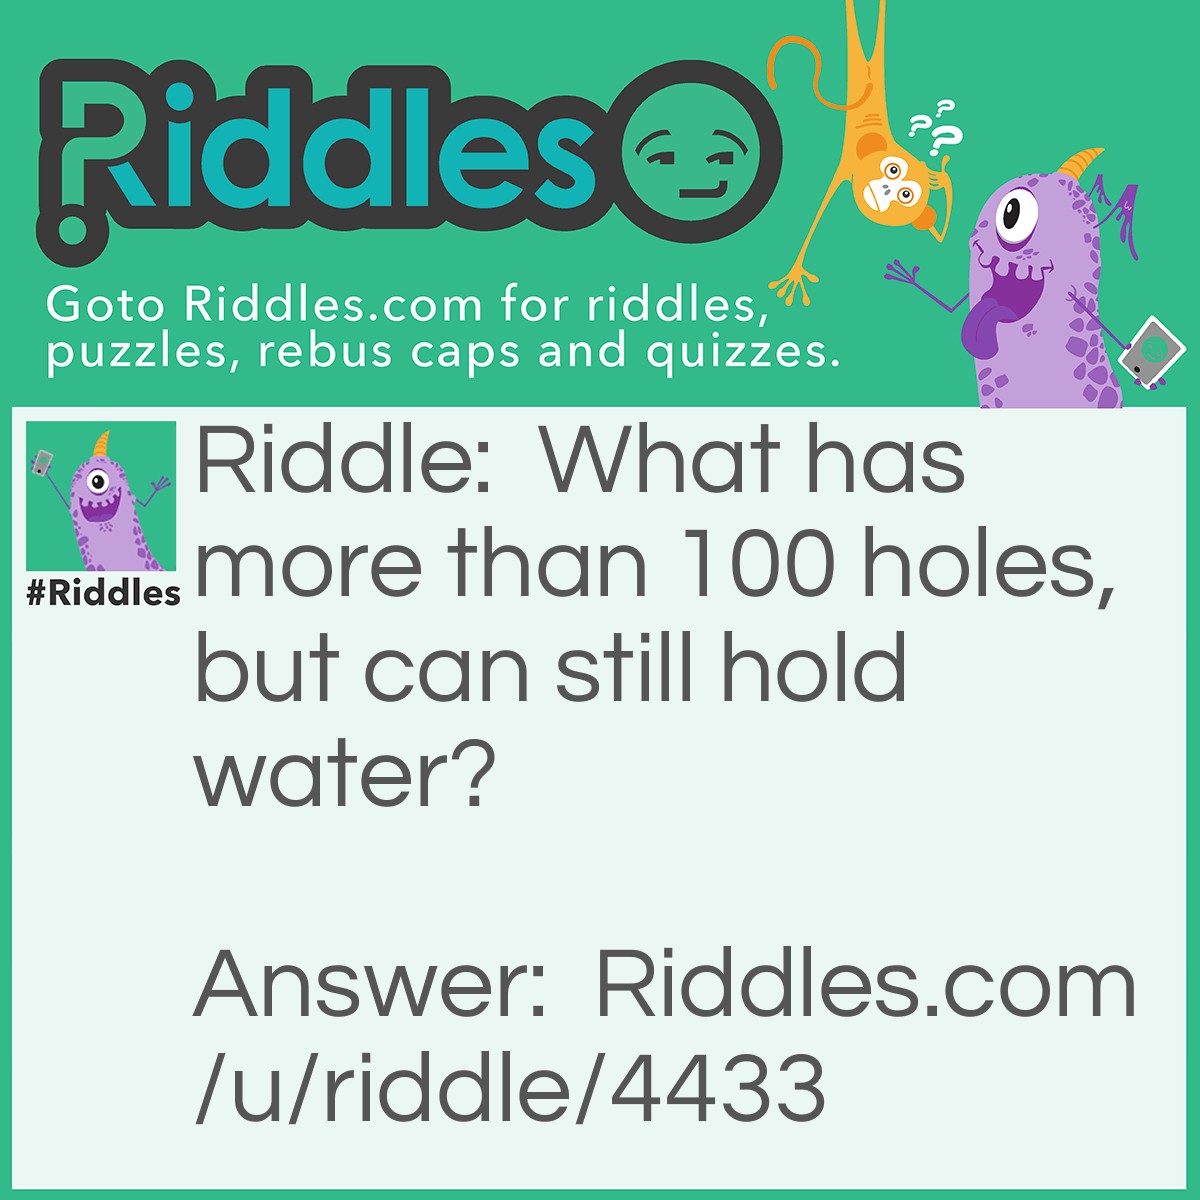 Riddle: What has more than 100 holes, but can still hold water? Answer: A sponge.